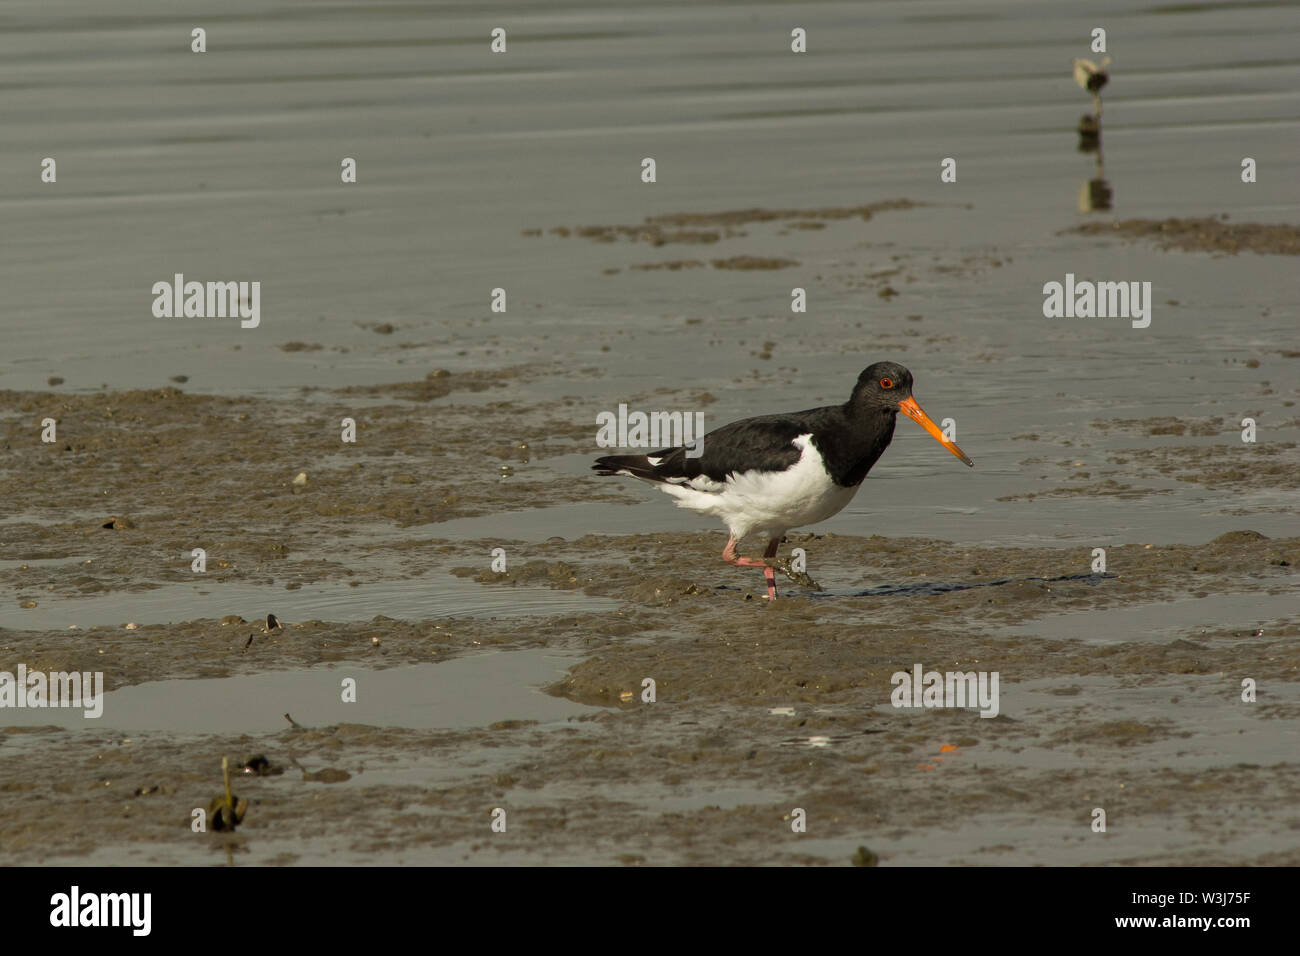 South Island Pied Oystercatcher (Haematopus finschi) wading in mud Stock Photo